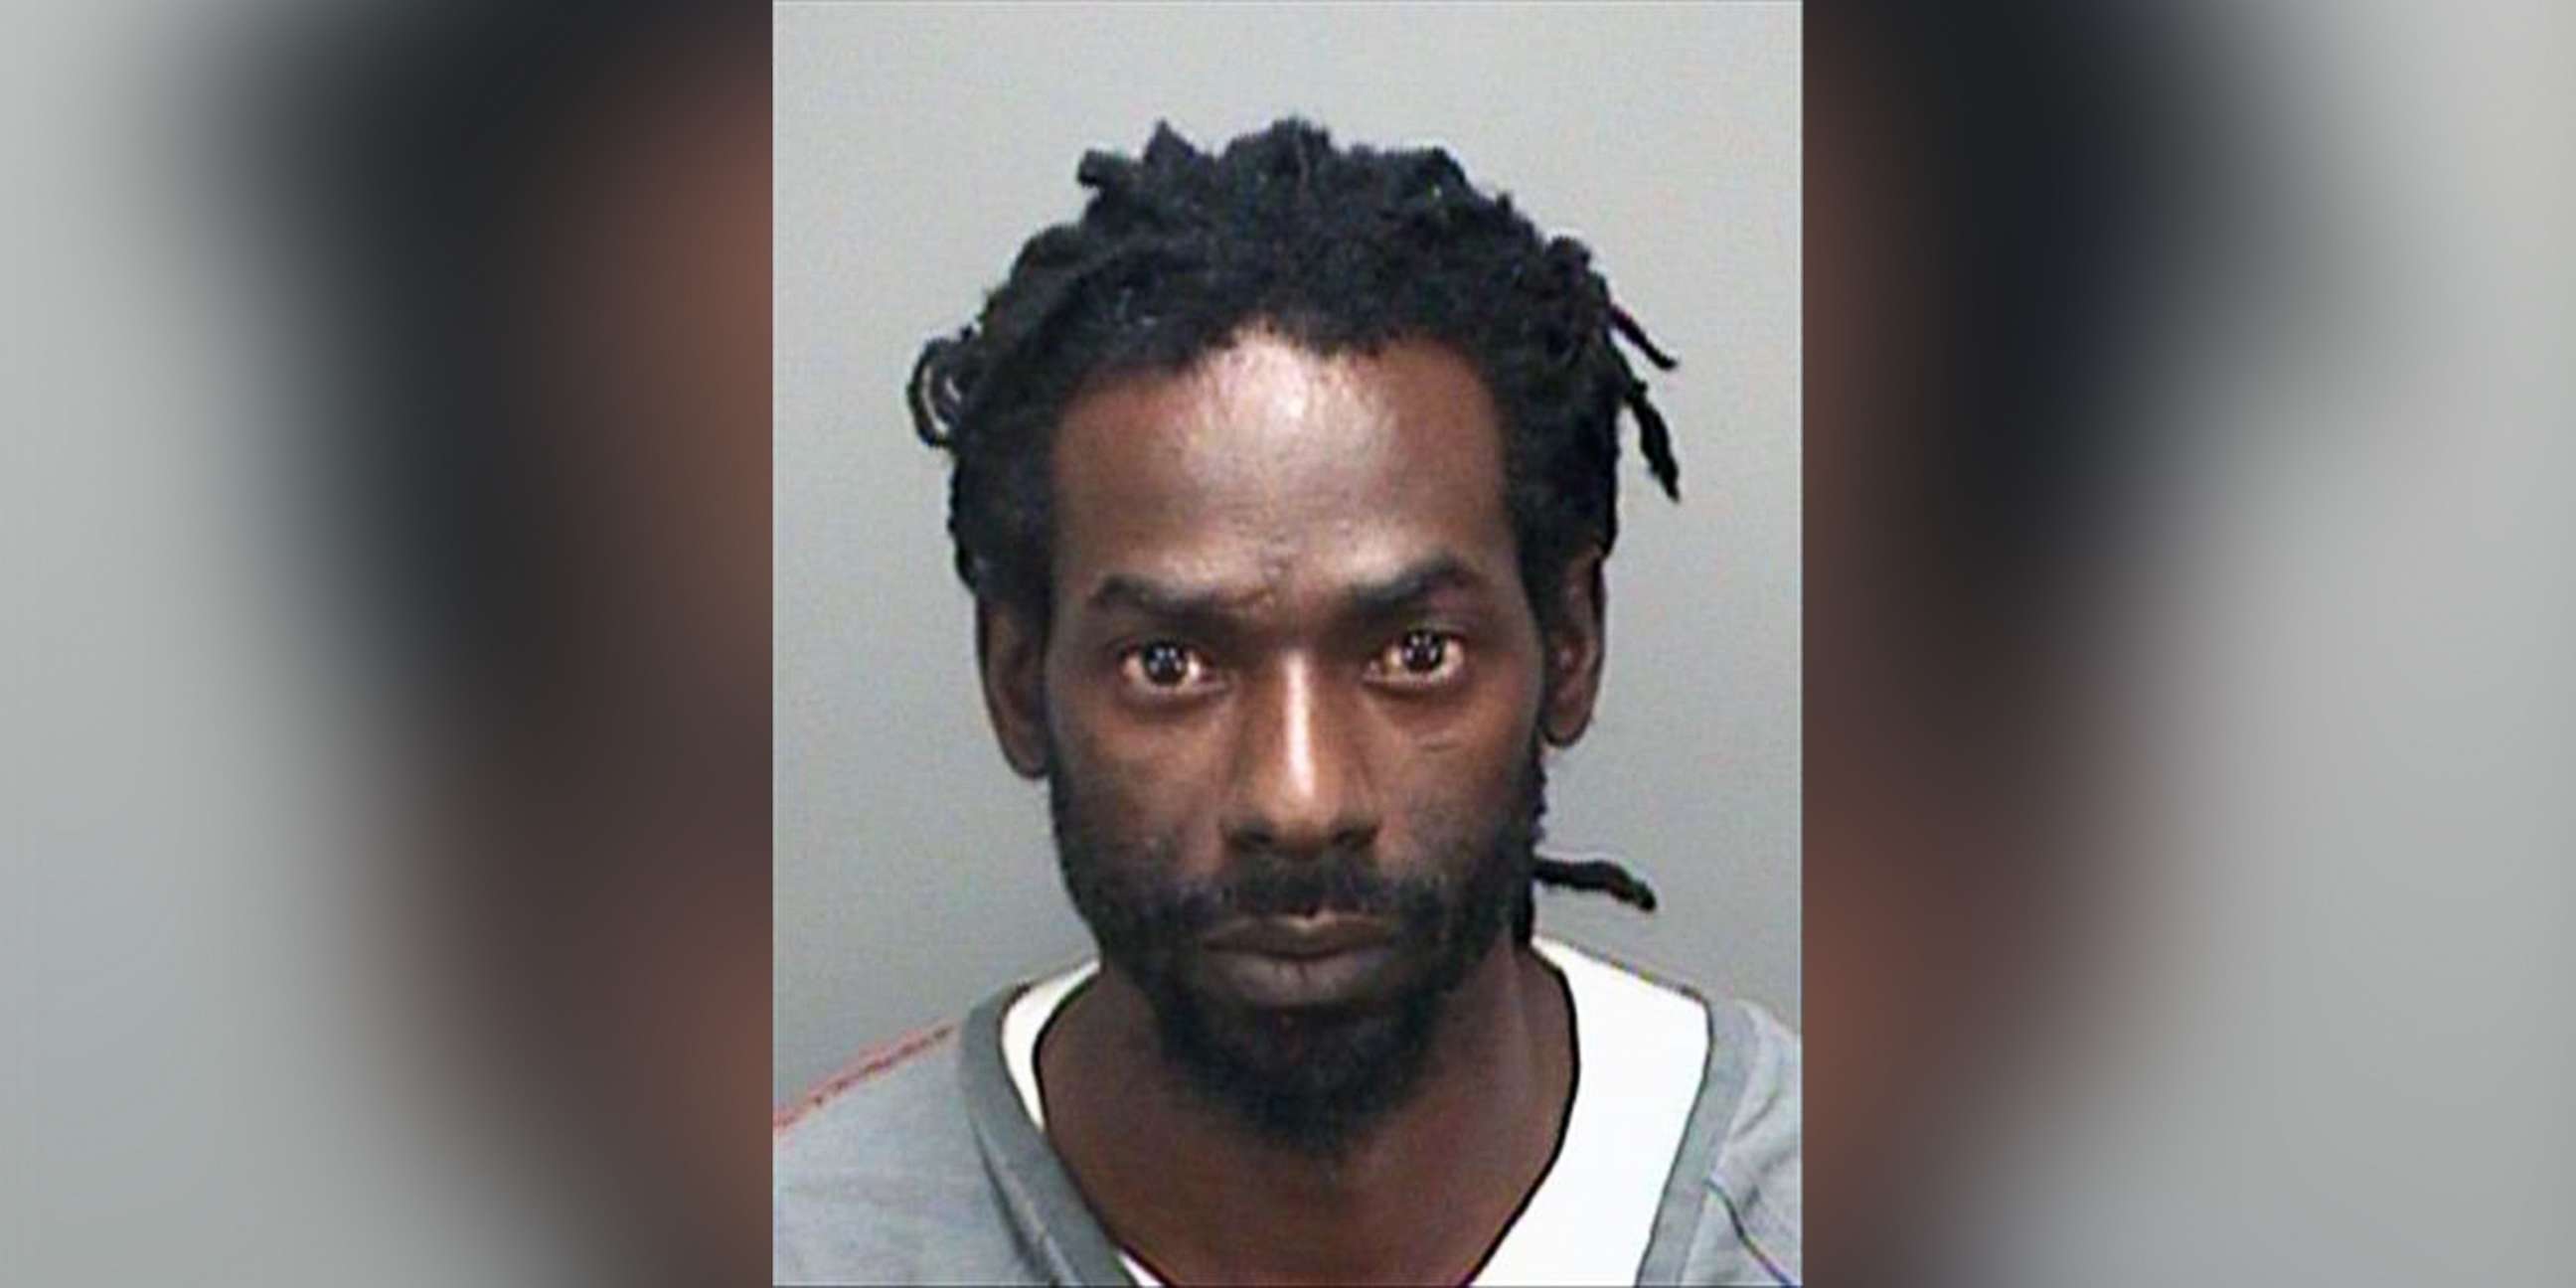 PHOTO: Buju Banton is pictured in an undated booking photo from the Pinellas County Sheriff.